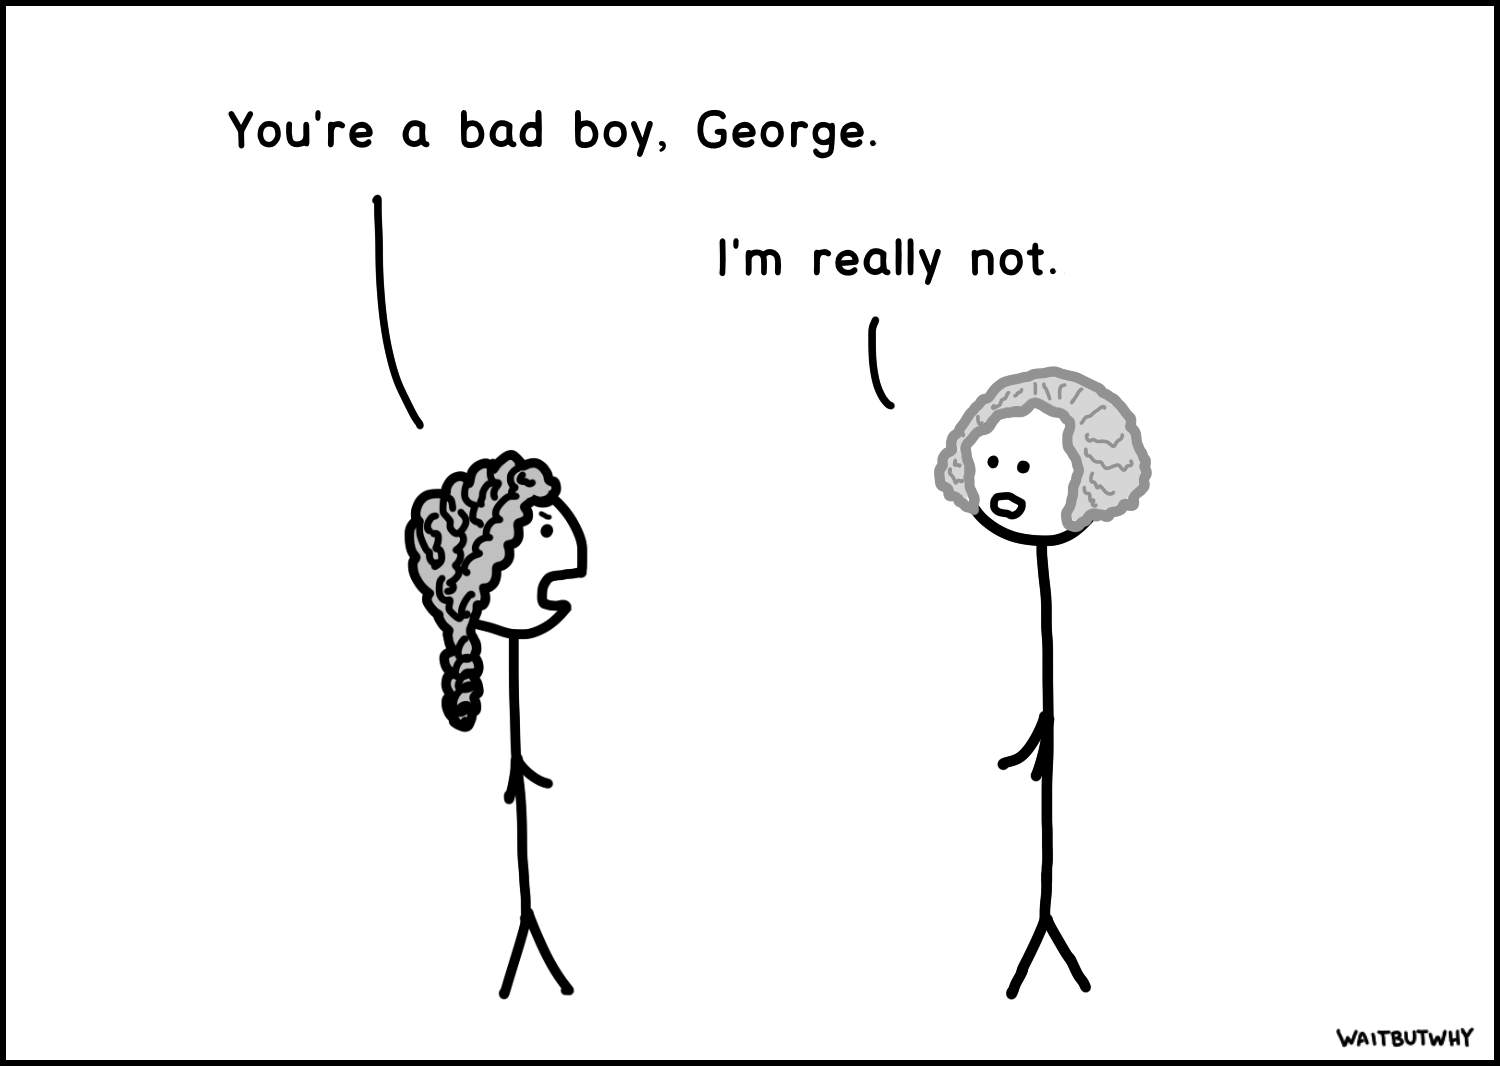 You're a bad boy, George. / I'm really not.